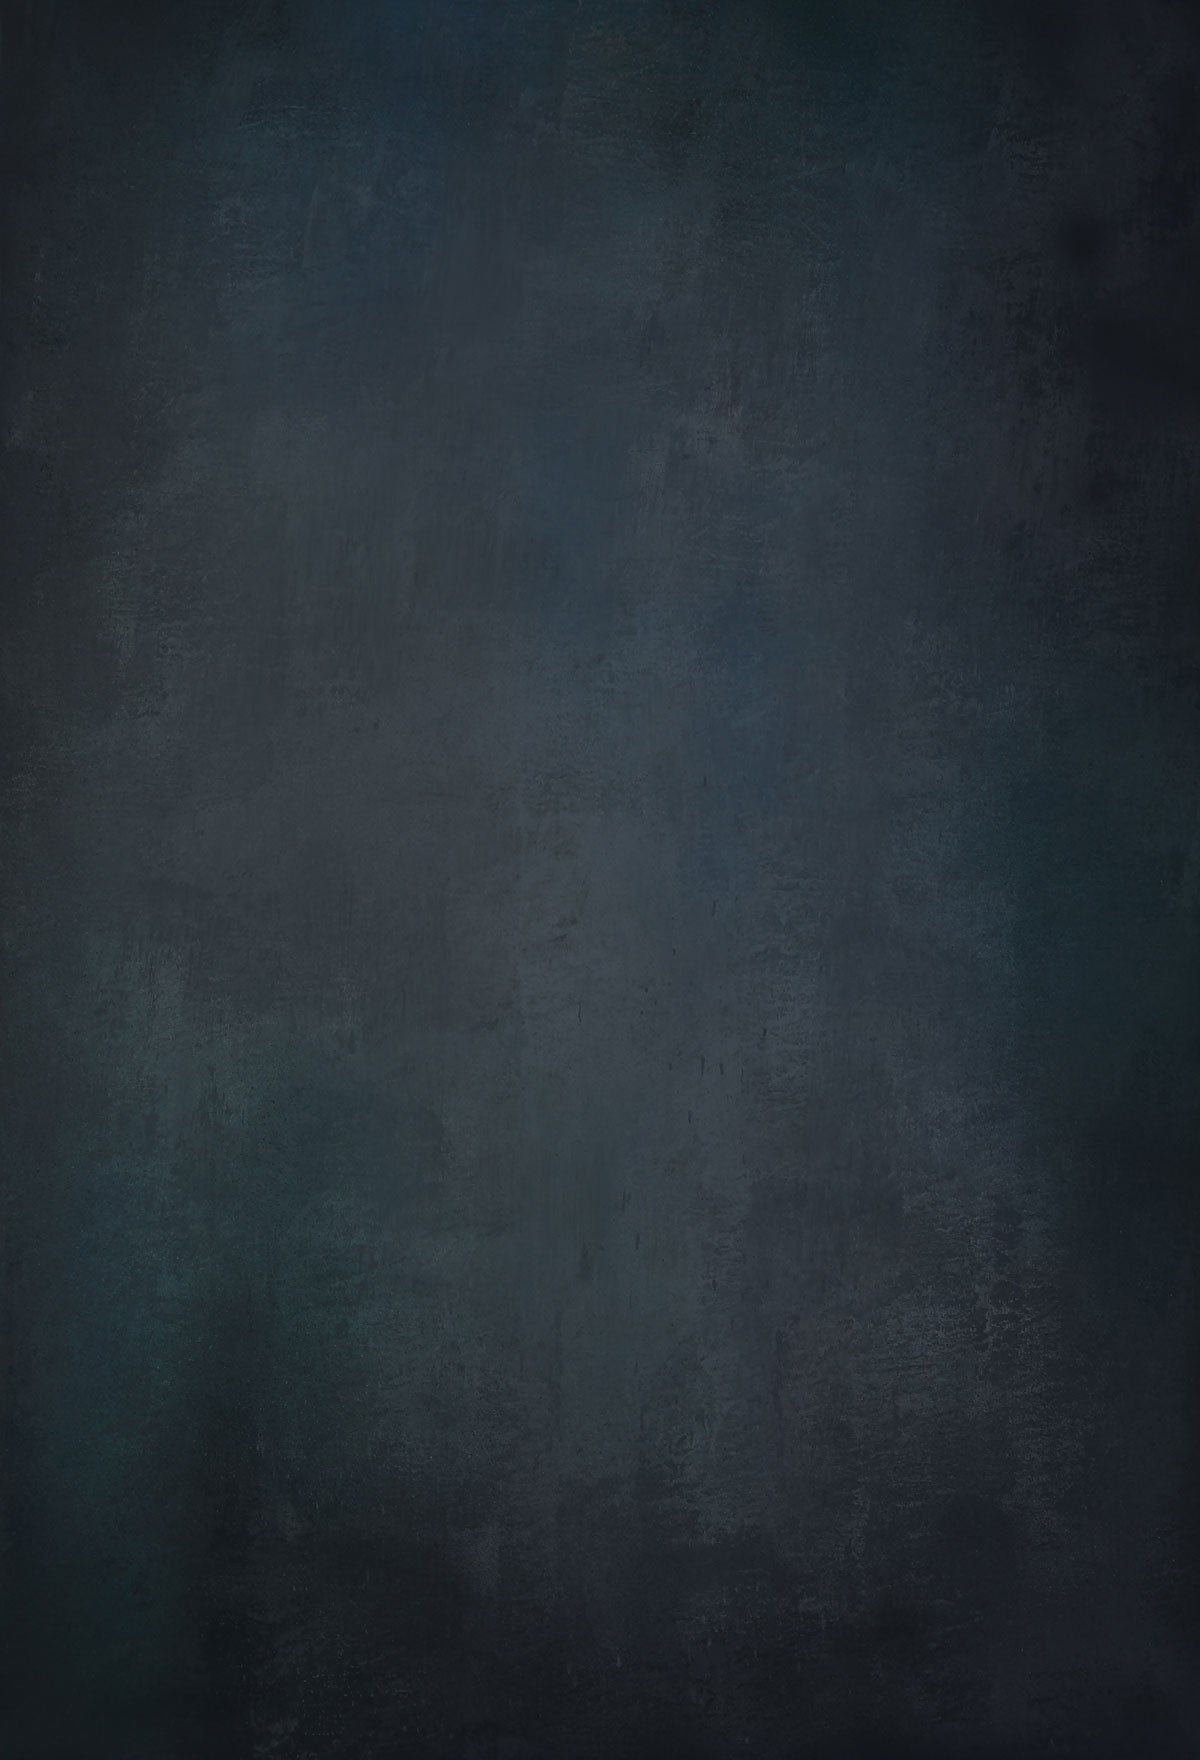 Kate Dark Cold Blue-Black Abstract Texture Backdrop for Portrait Photography